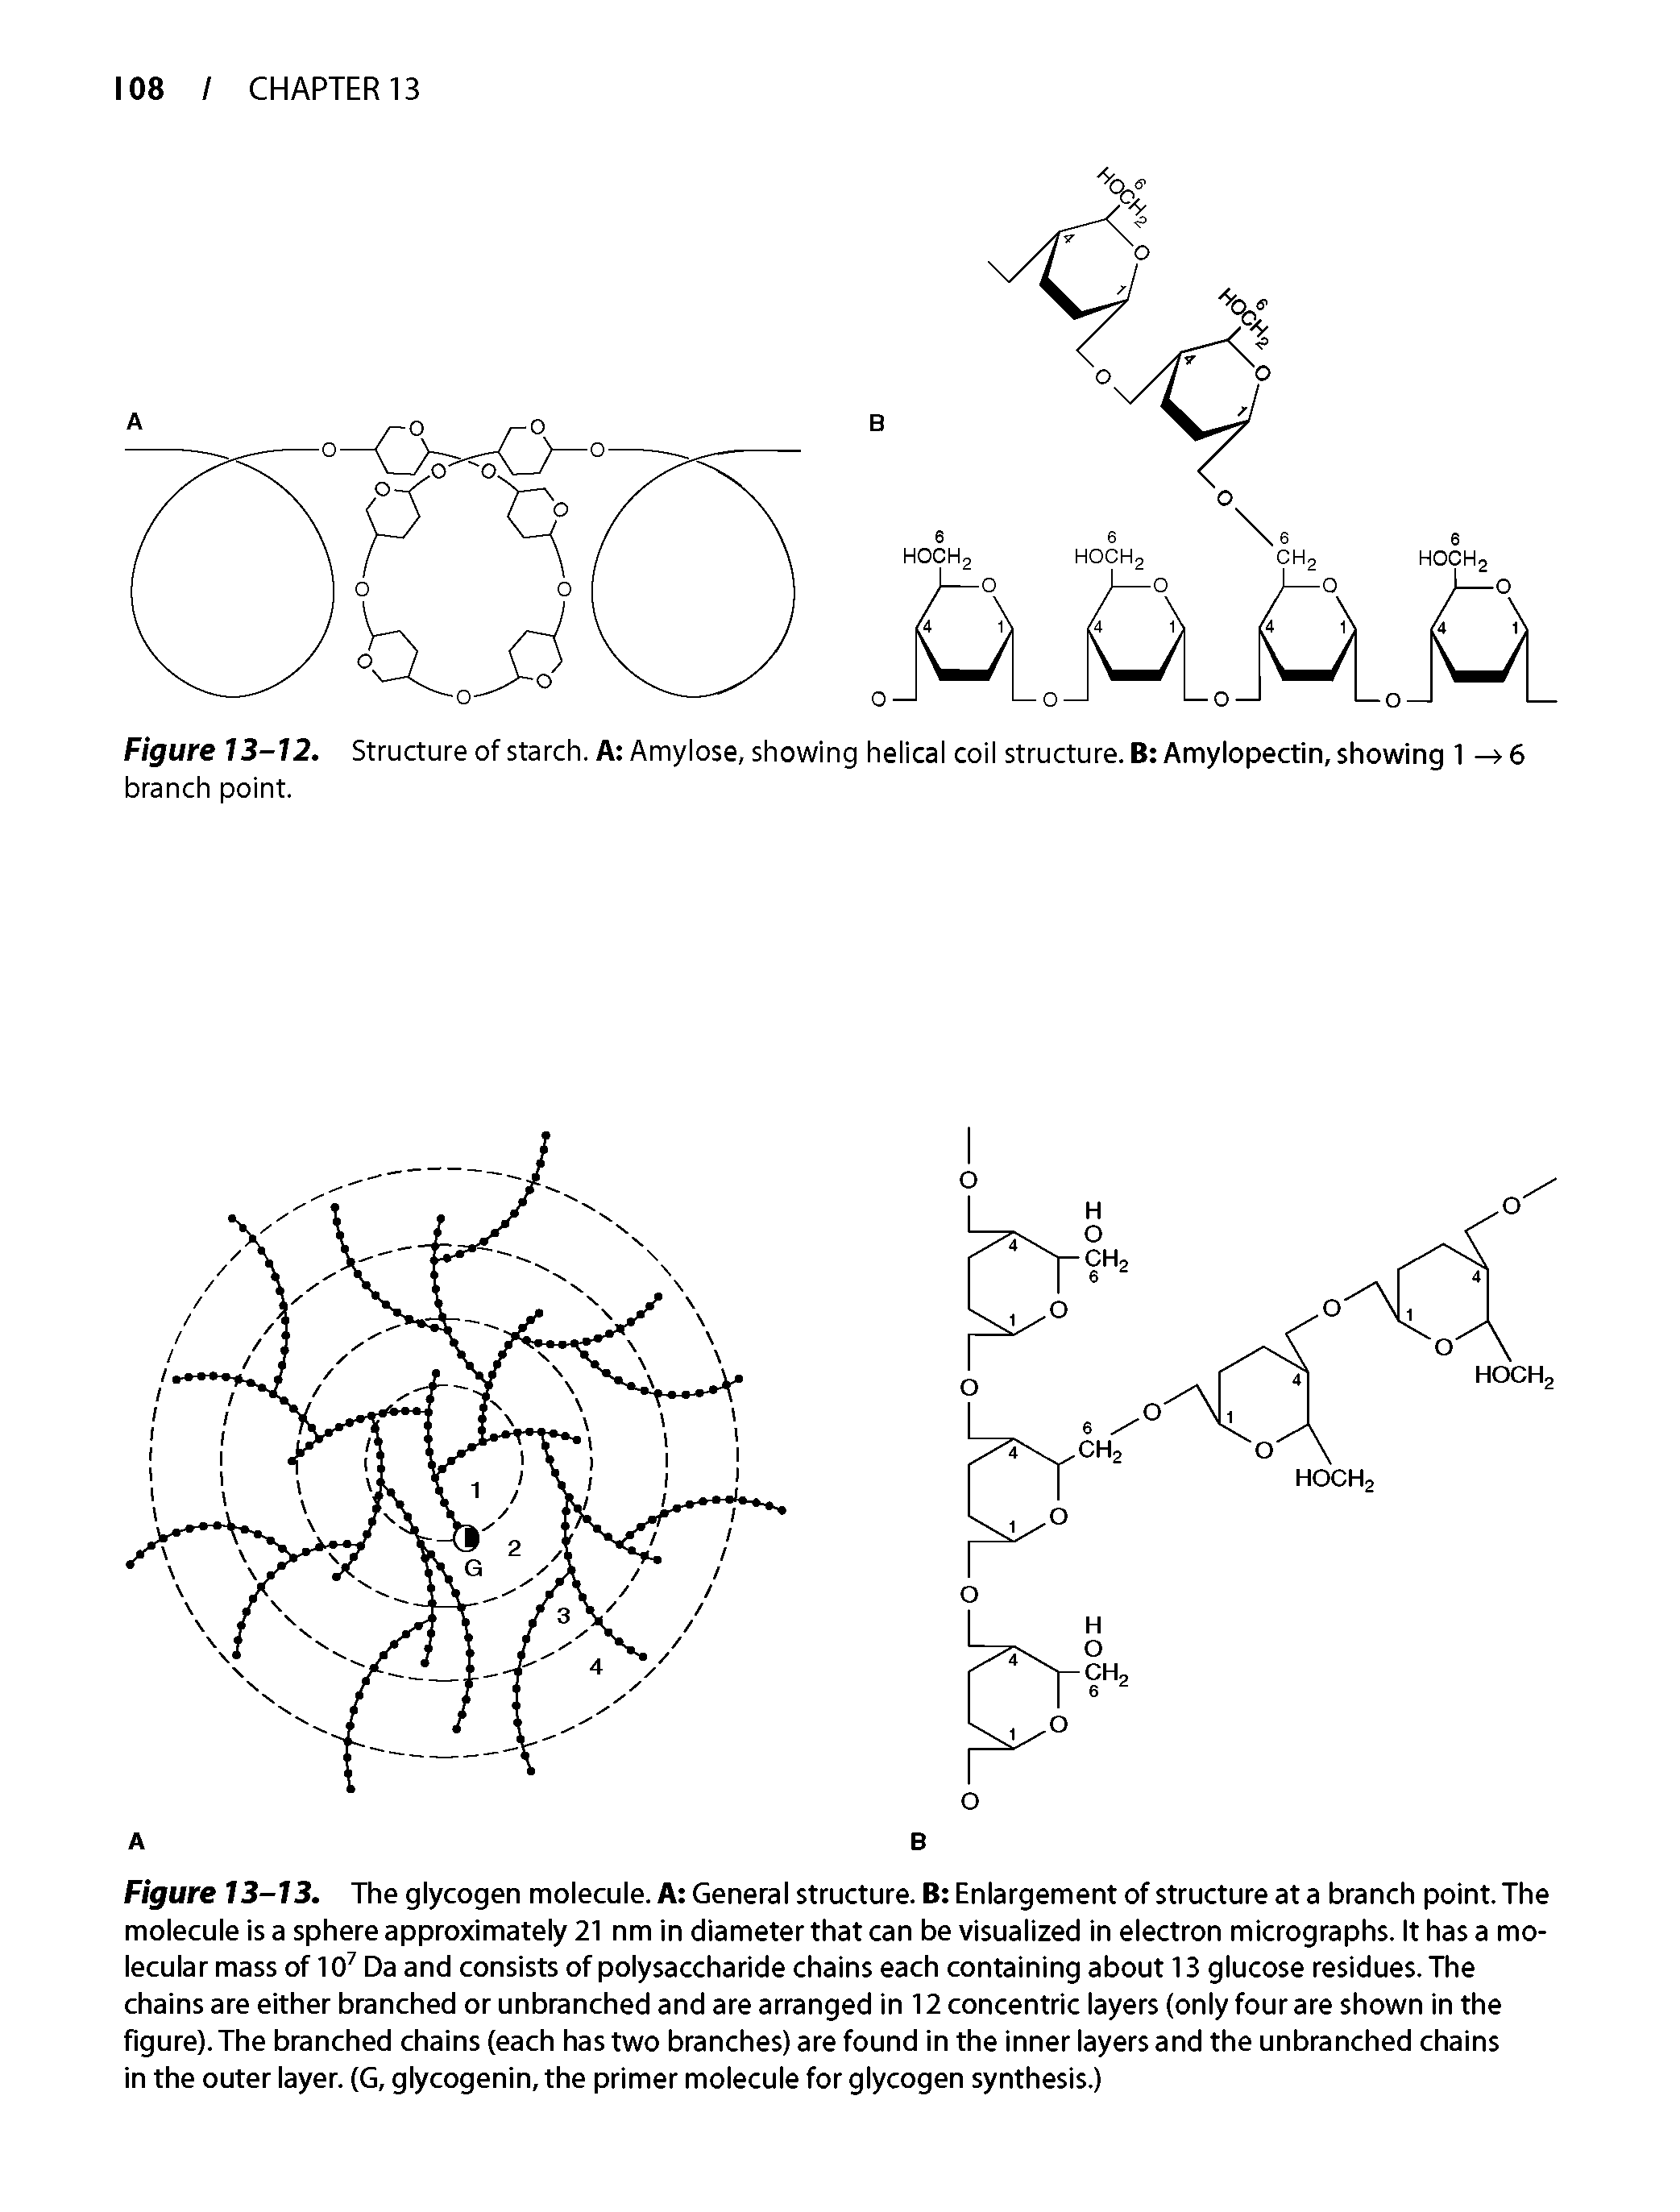 Figure 13-13. The glycogen molecule. A General structure. B Enlargement of structure at a branch point. The molecule is a sphere approximately 21 nm in diameter that can be visualized in electron micrographs. It has a molecular mass of 10 Da and consists of polysaccharide chains each containing about 13 glucose residues. The chains are either branched or unbranched and are arranged in 12 concentric layers (only four are shown in the figure). The branched chains (each has two branches) are found in the inner layers and the unbranched chains in the outer layer. (G, glycogenin, the primer molecule for glycogen synthesis.)...